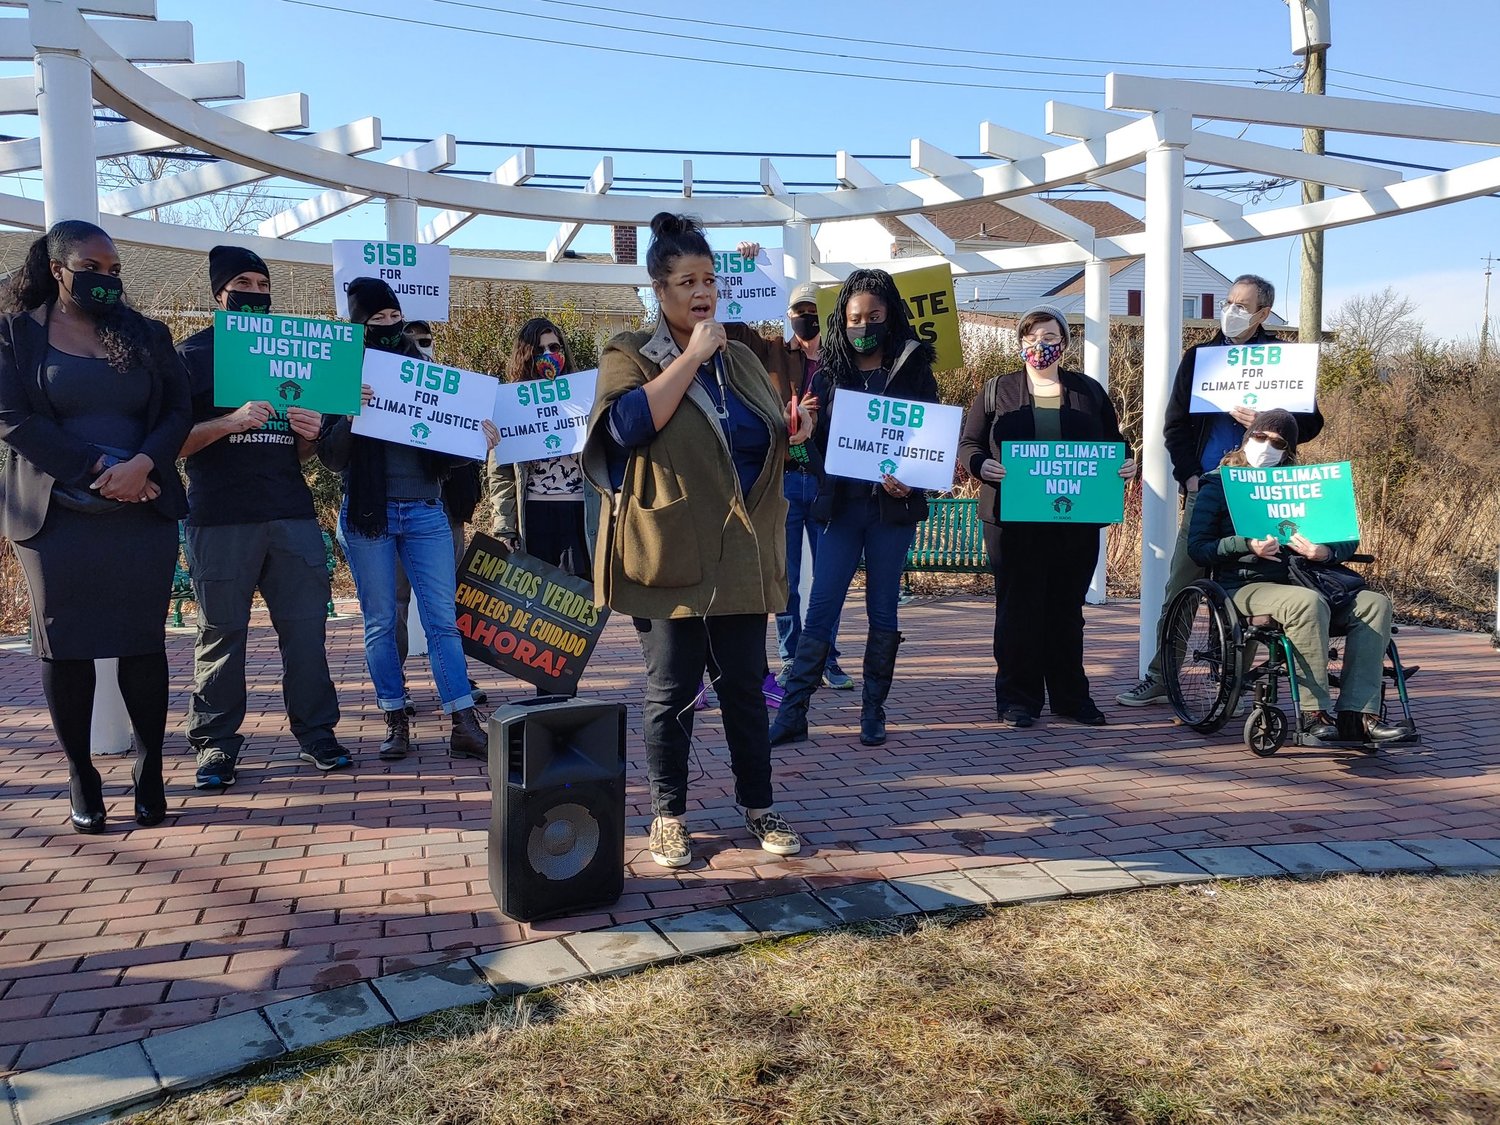 State Assemblywoman Michaelle Solages, who represents Elmont, spoke at the rally, calling for $15 billion in funding for action on climate change.